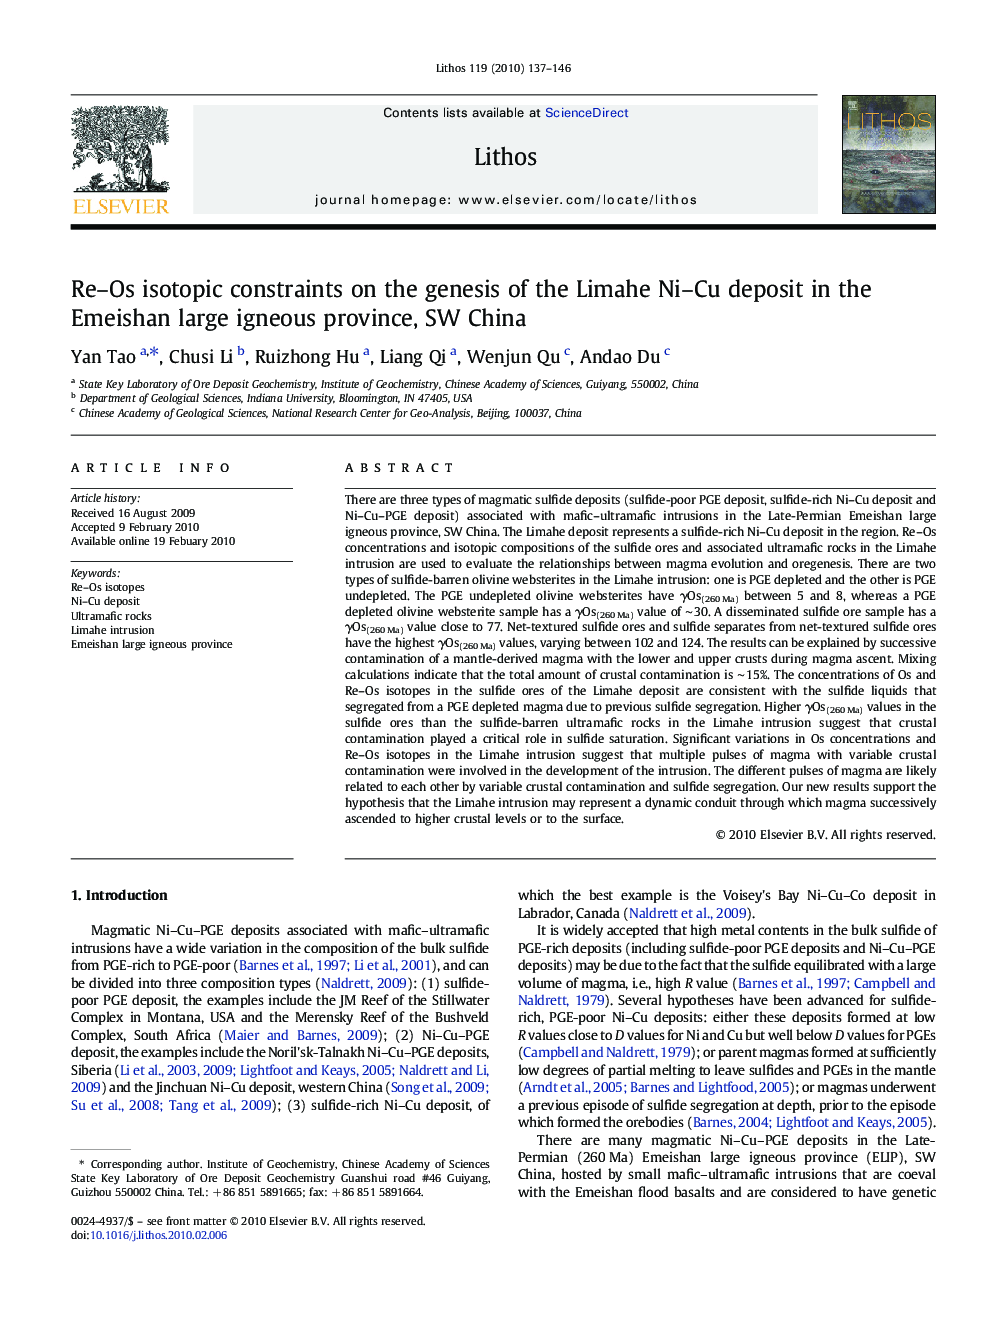 Re–Os isotopic constraints on the genesis of the Limahe Ni–Cu deposit in the Emeishan large igneous province, SW China